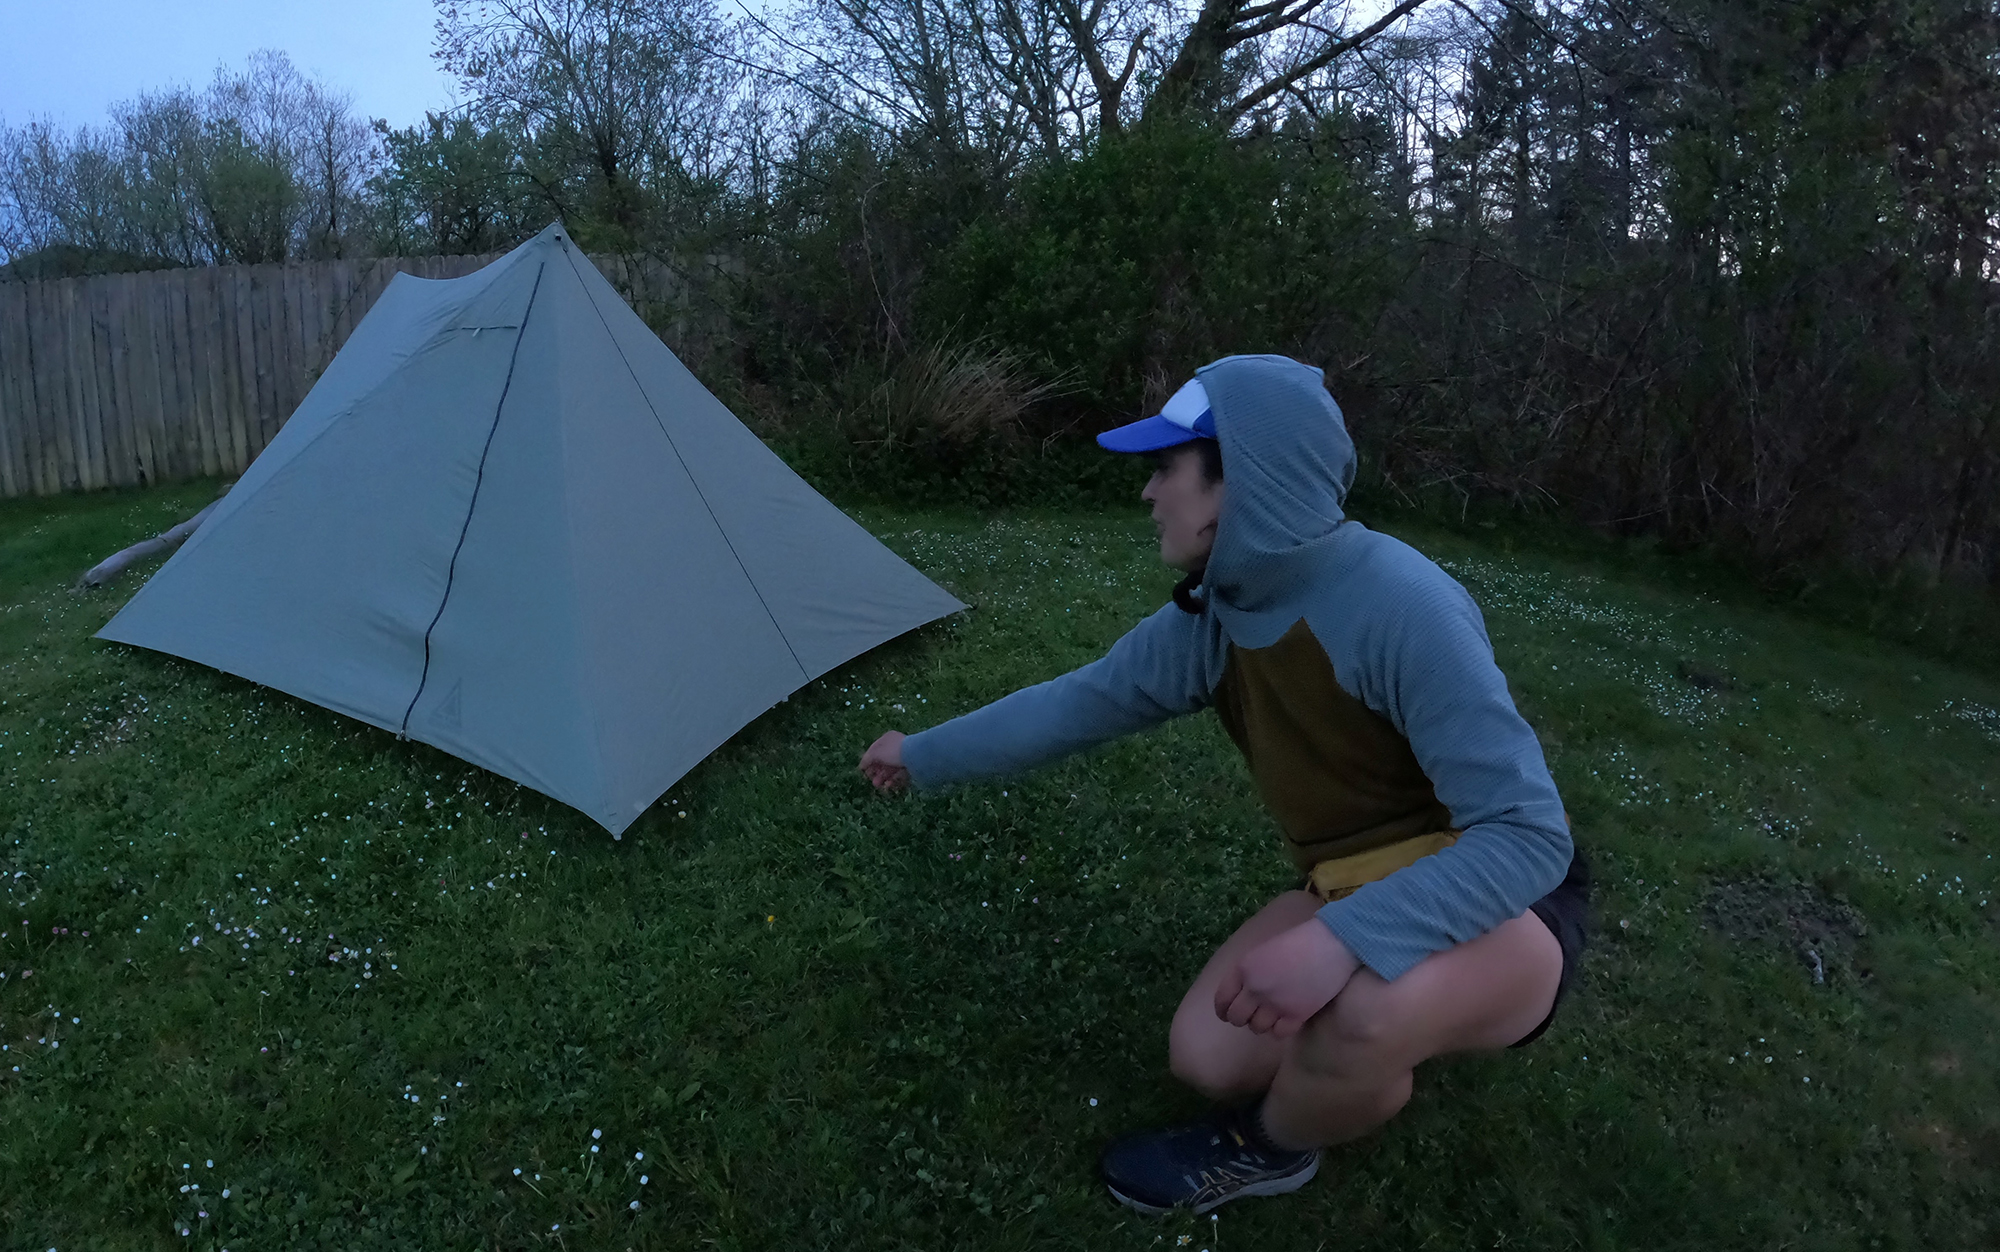 Jac “Top Shelf” Mitchell, our most experienced tester, said that this tent was as easy to set up as a freestanding tent.